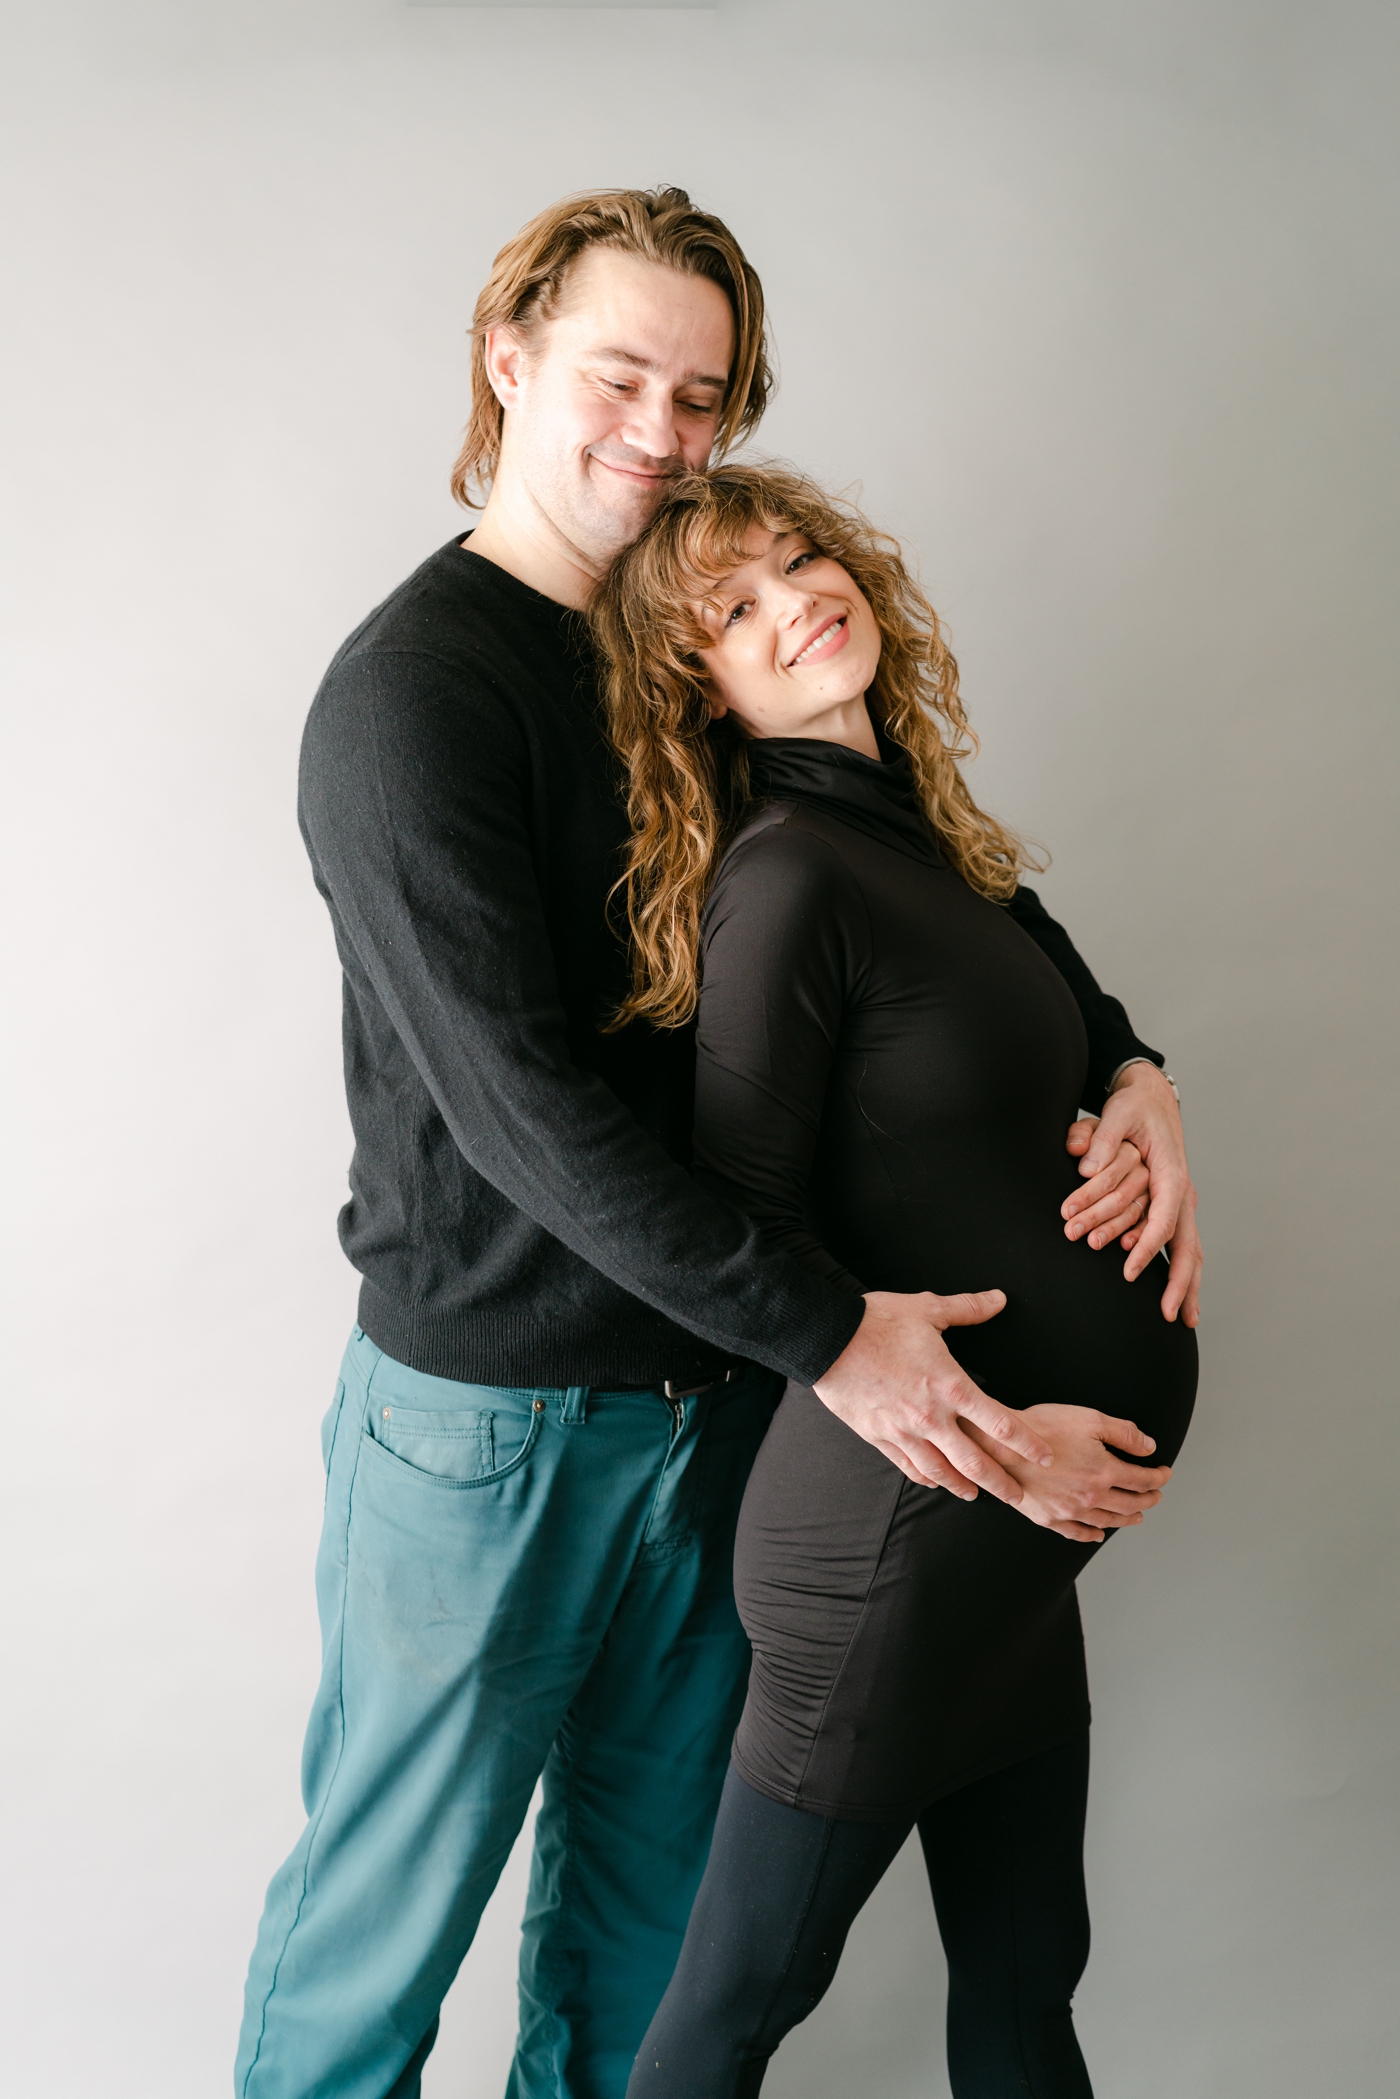 Mom and dad hugging during studio session. Photo by Asheville maternity photographer, Lauren Sosler Photography